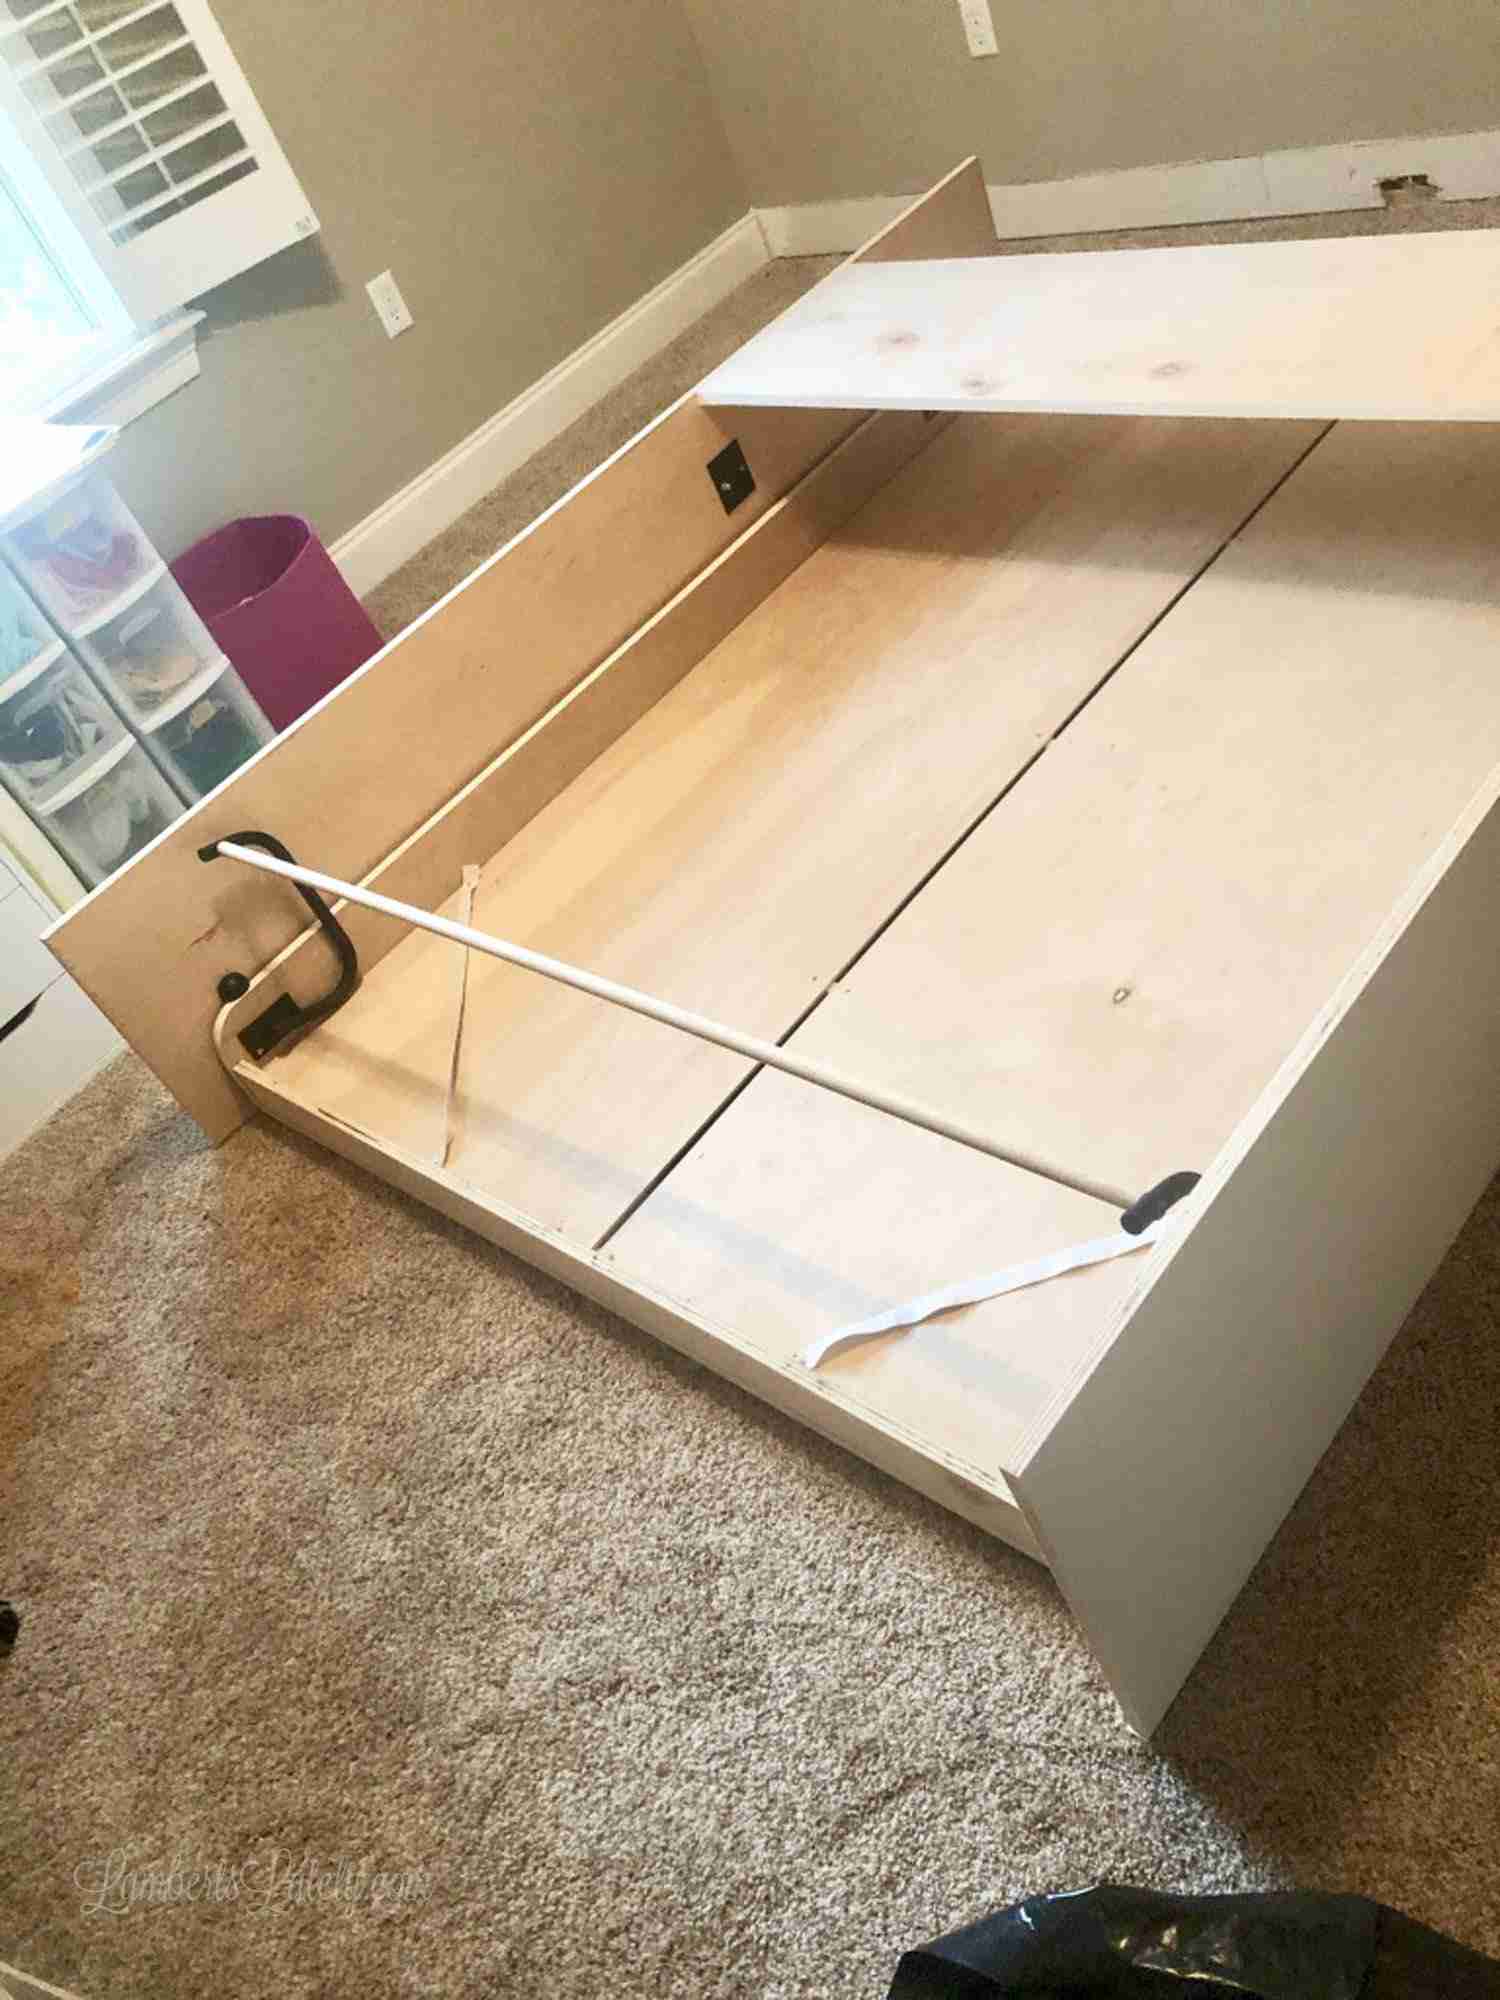 Create-a-bed flat on a bedroom floor.